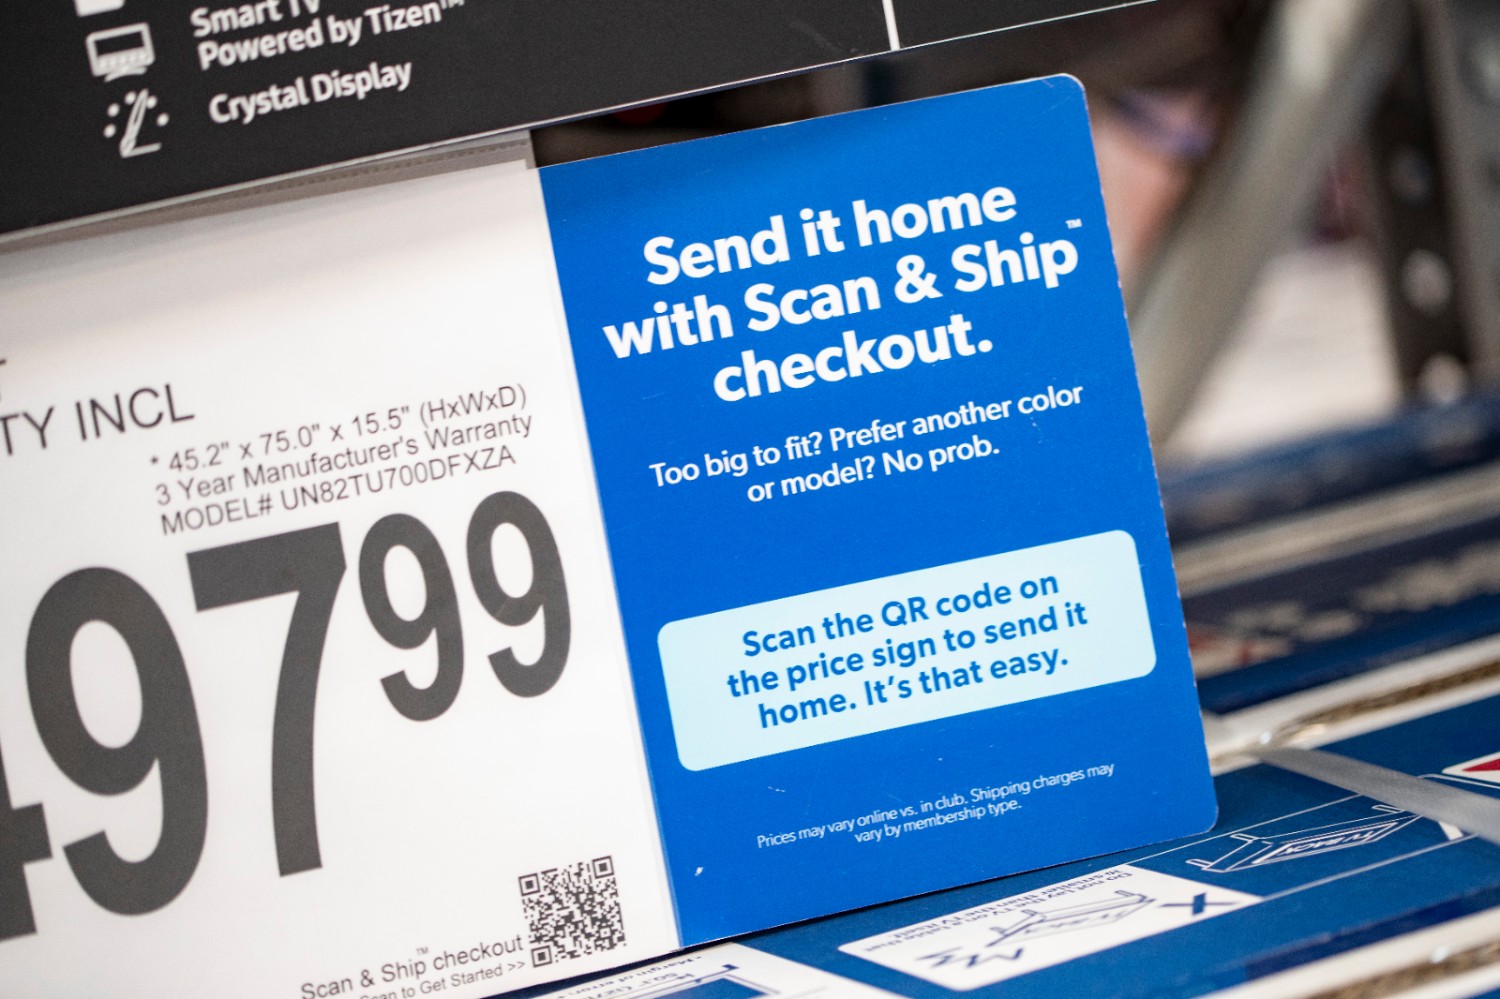 Sam's Club finds value in intelligent retargeting of shoppers, sams 